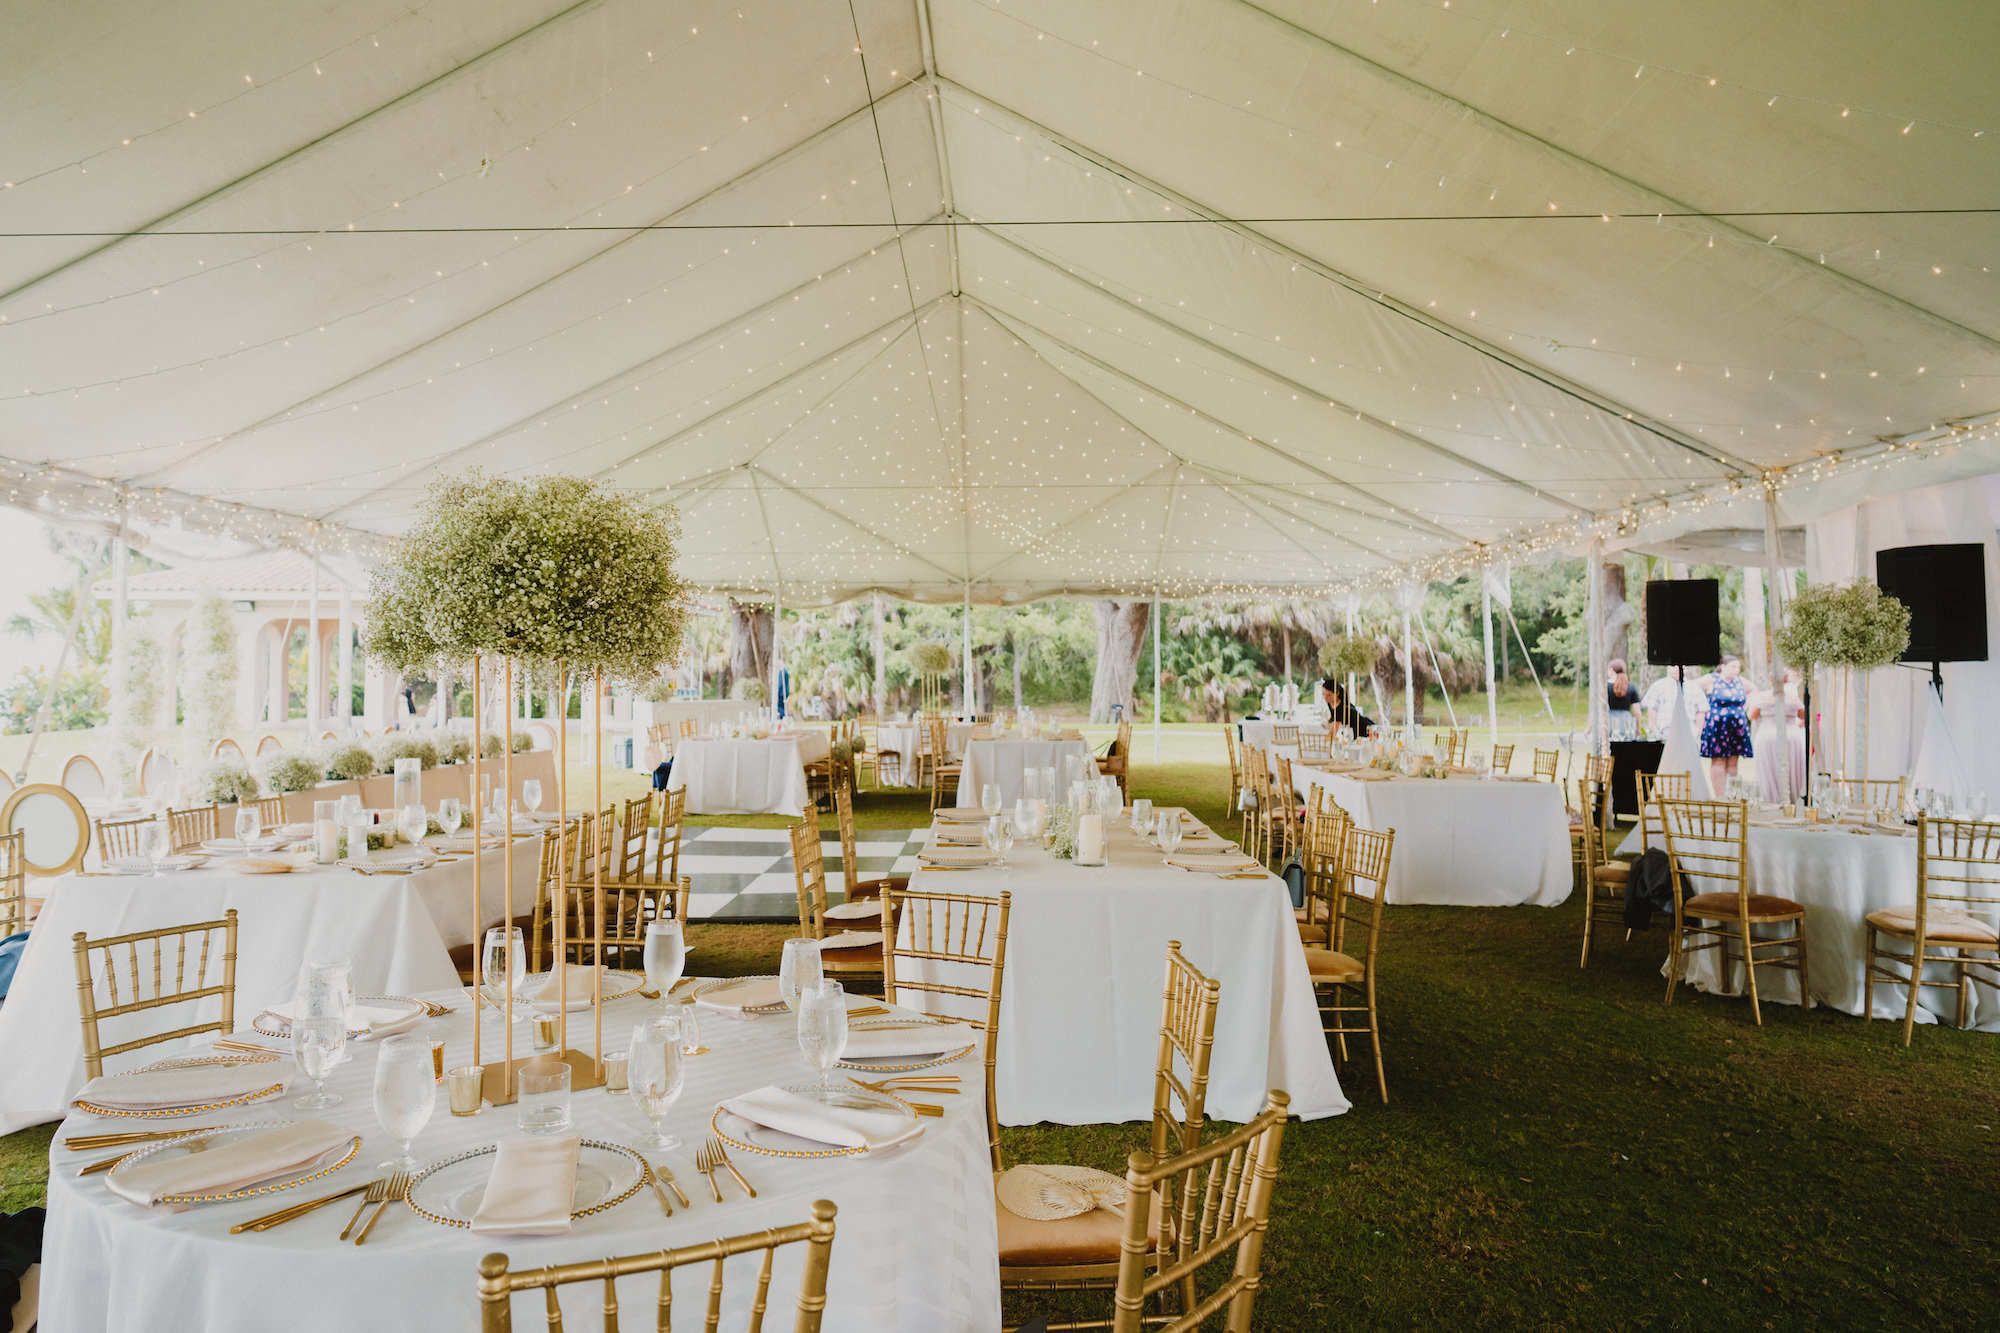 Outdoor Wedding Reception Tent with String Lights | Tall Gold Column Flower Stand with Baby's Breath | Gold Chiavari Chairs | Tampa Bay Planner Kelly Kennedy Weddings and Events